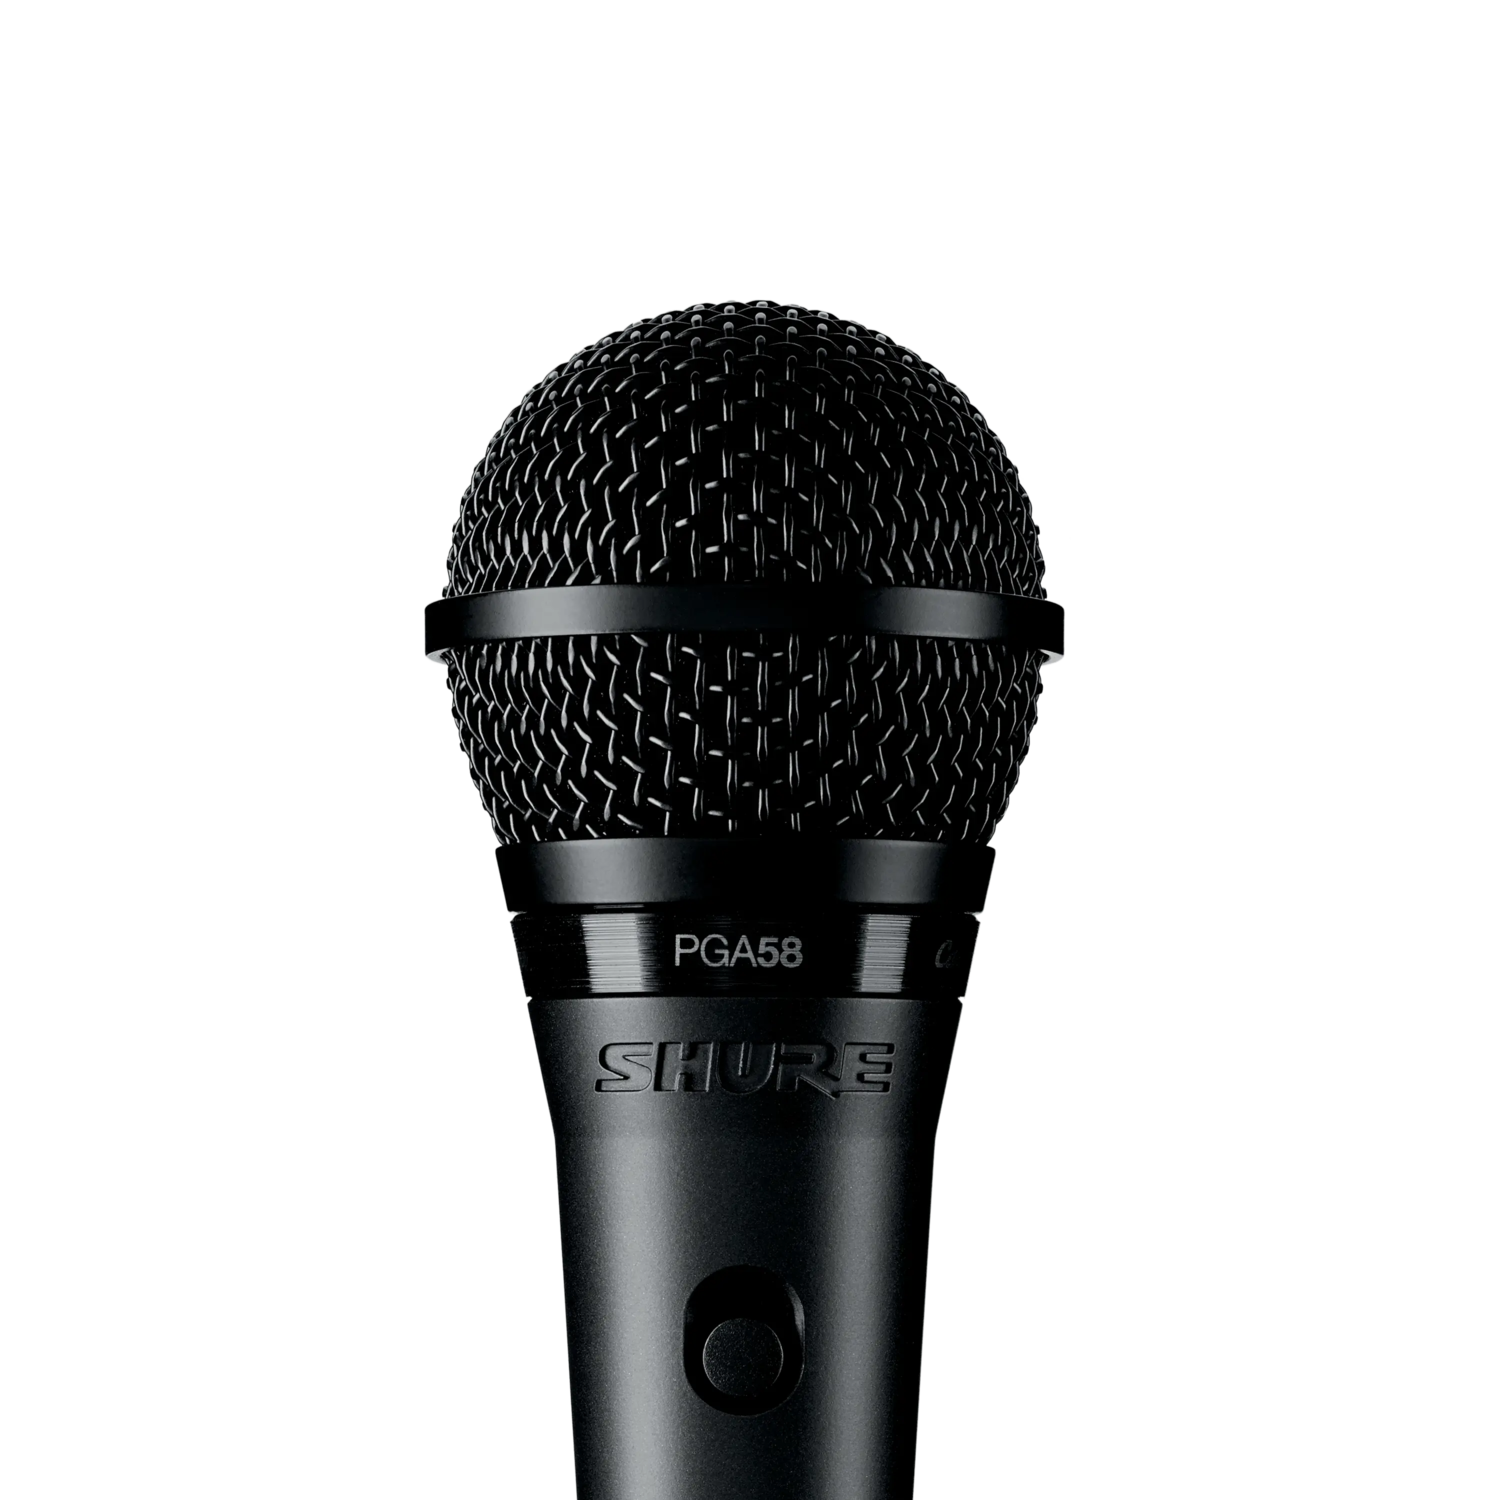 https://products.shureweb.eu/shure_product_db/product_main_images/files/a83/04a/ef-/large_transparent/98c3763caadde2cab13883442b8514bc.png